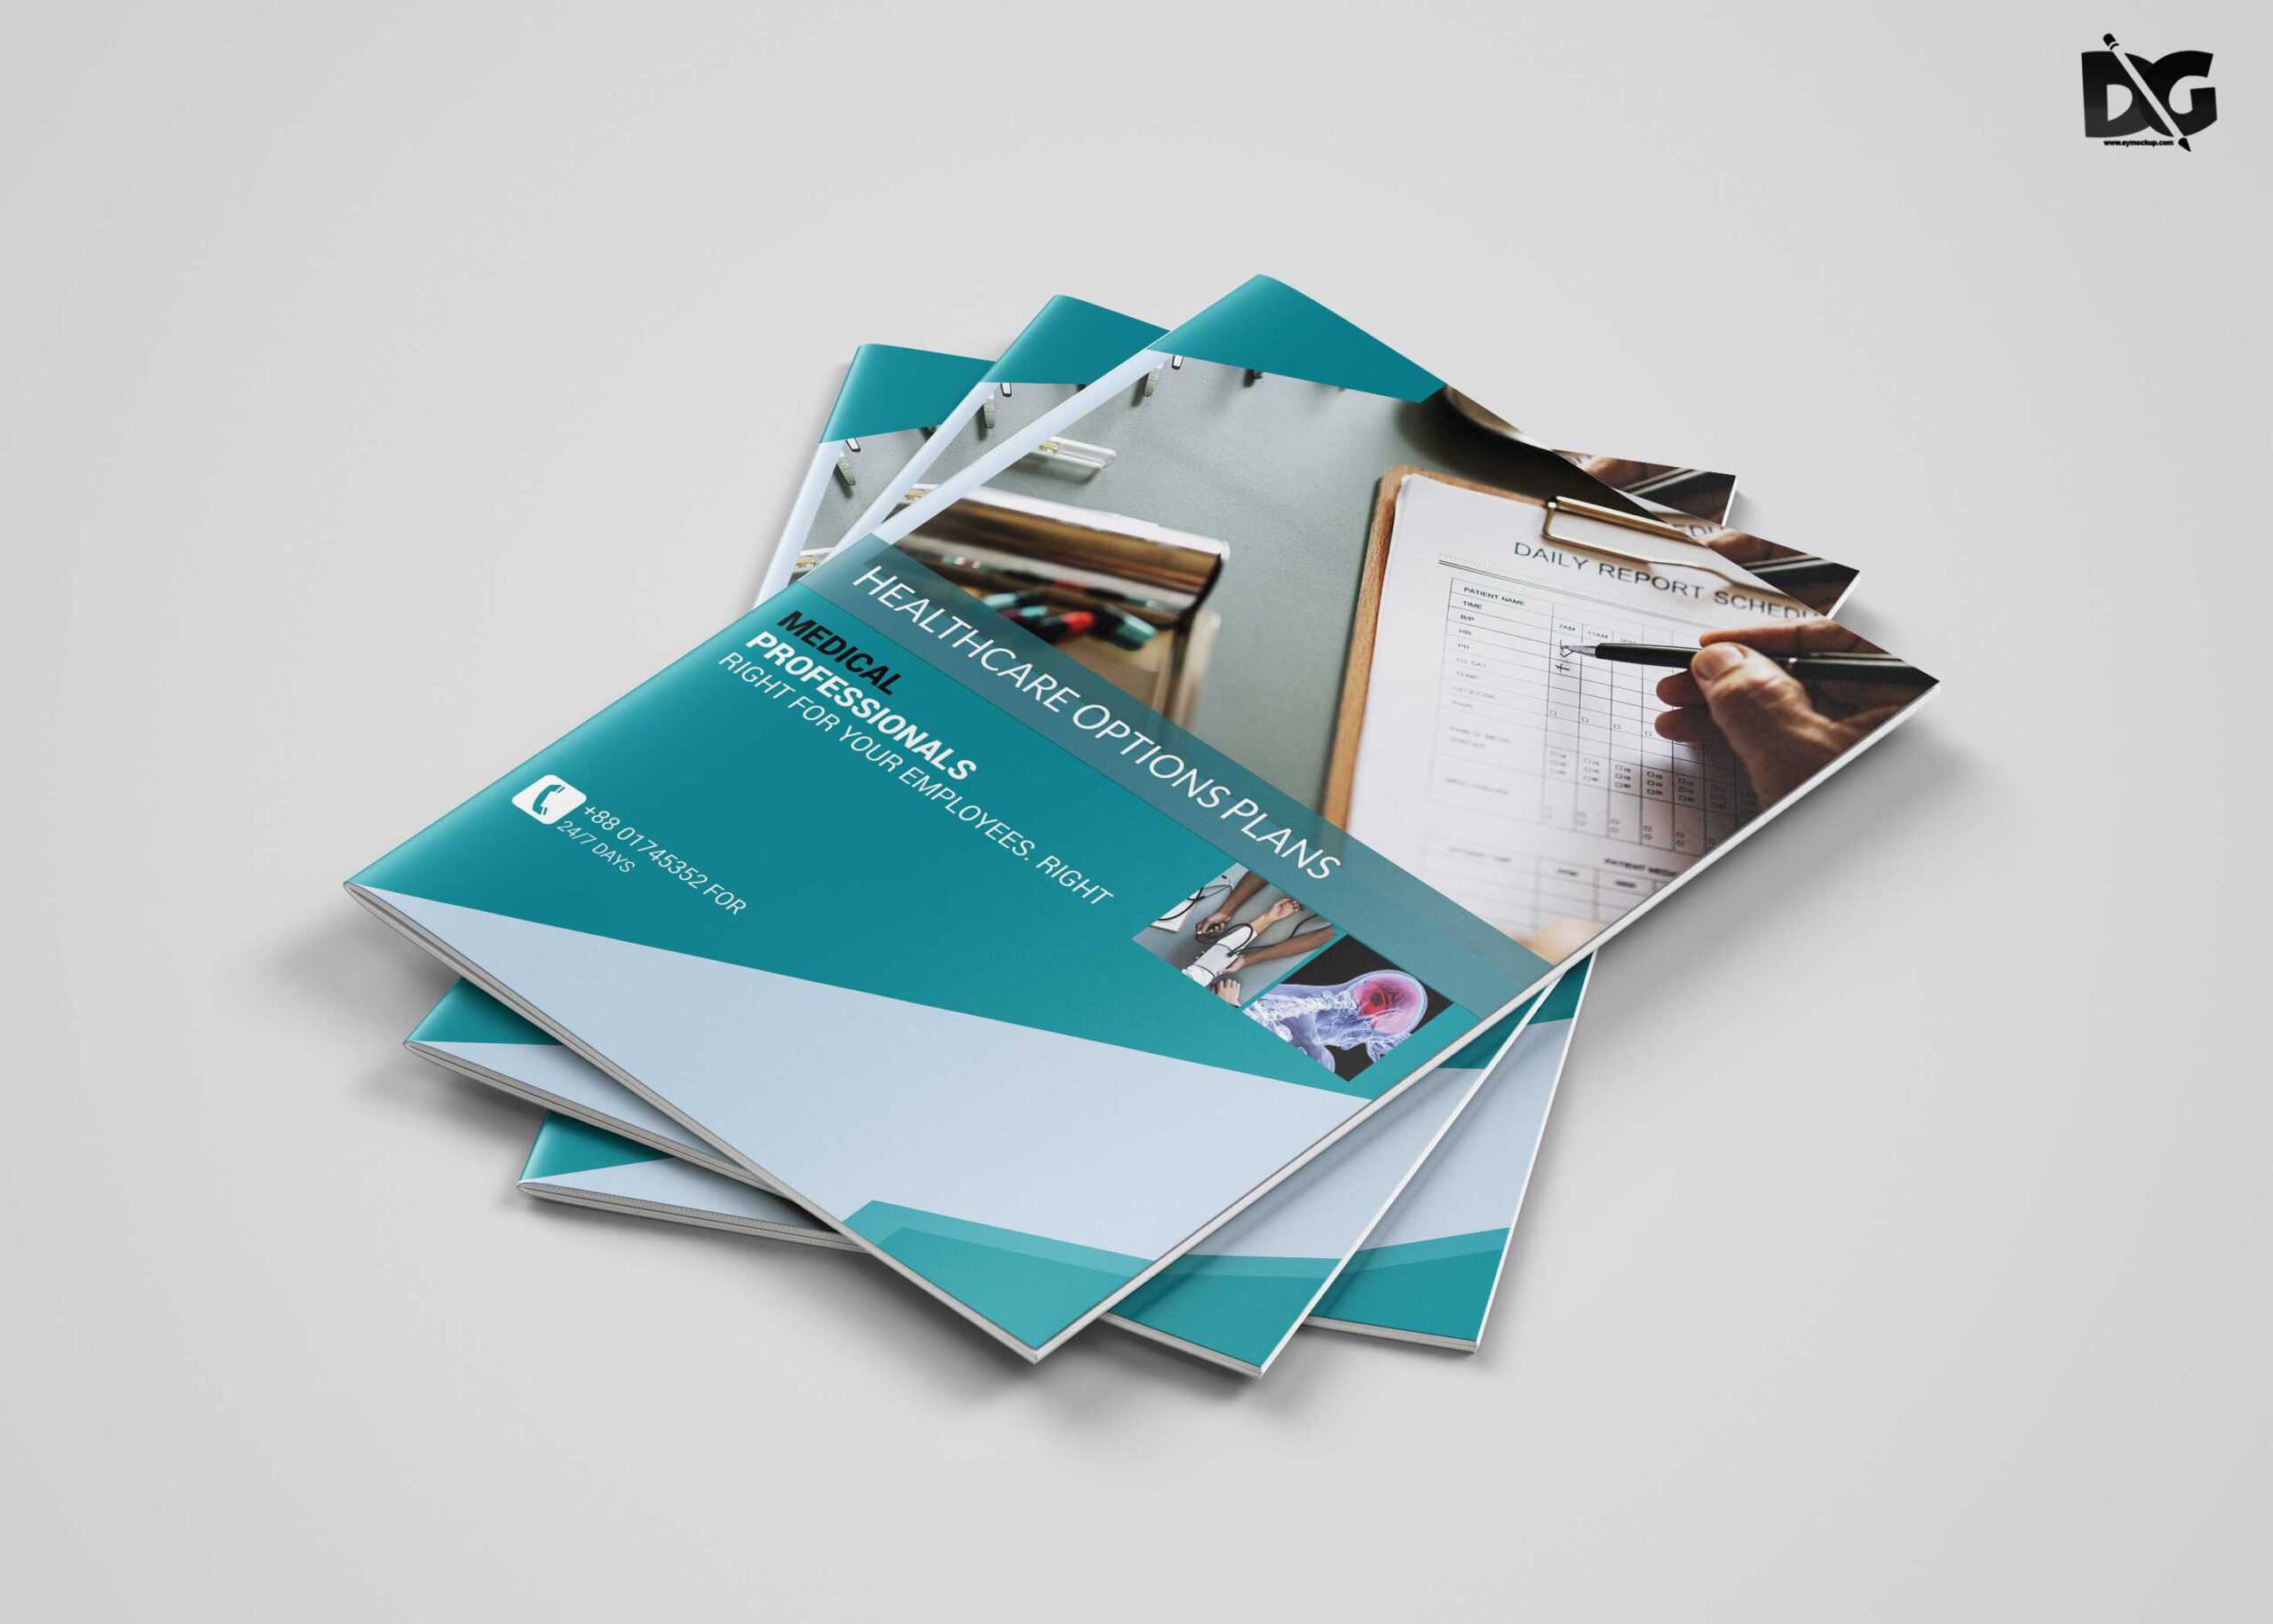 Free Download Health Care A4 Brochure Template | Free Psd Mockup Within Healthcare Brochure Templates Free Download